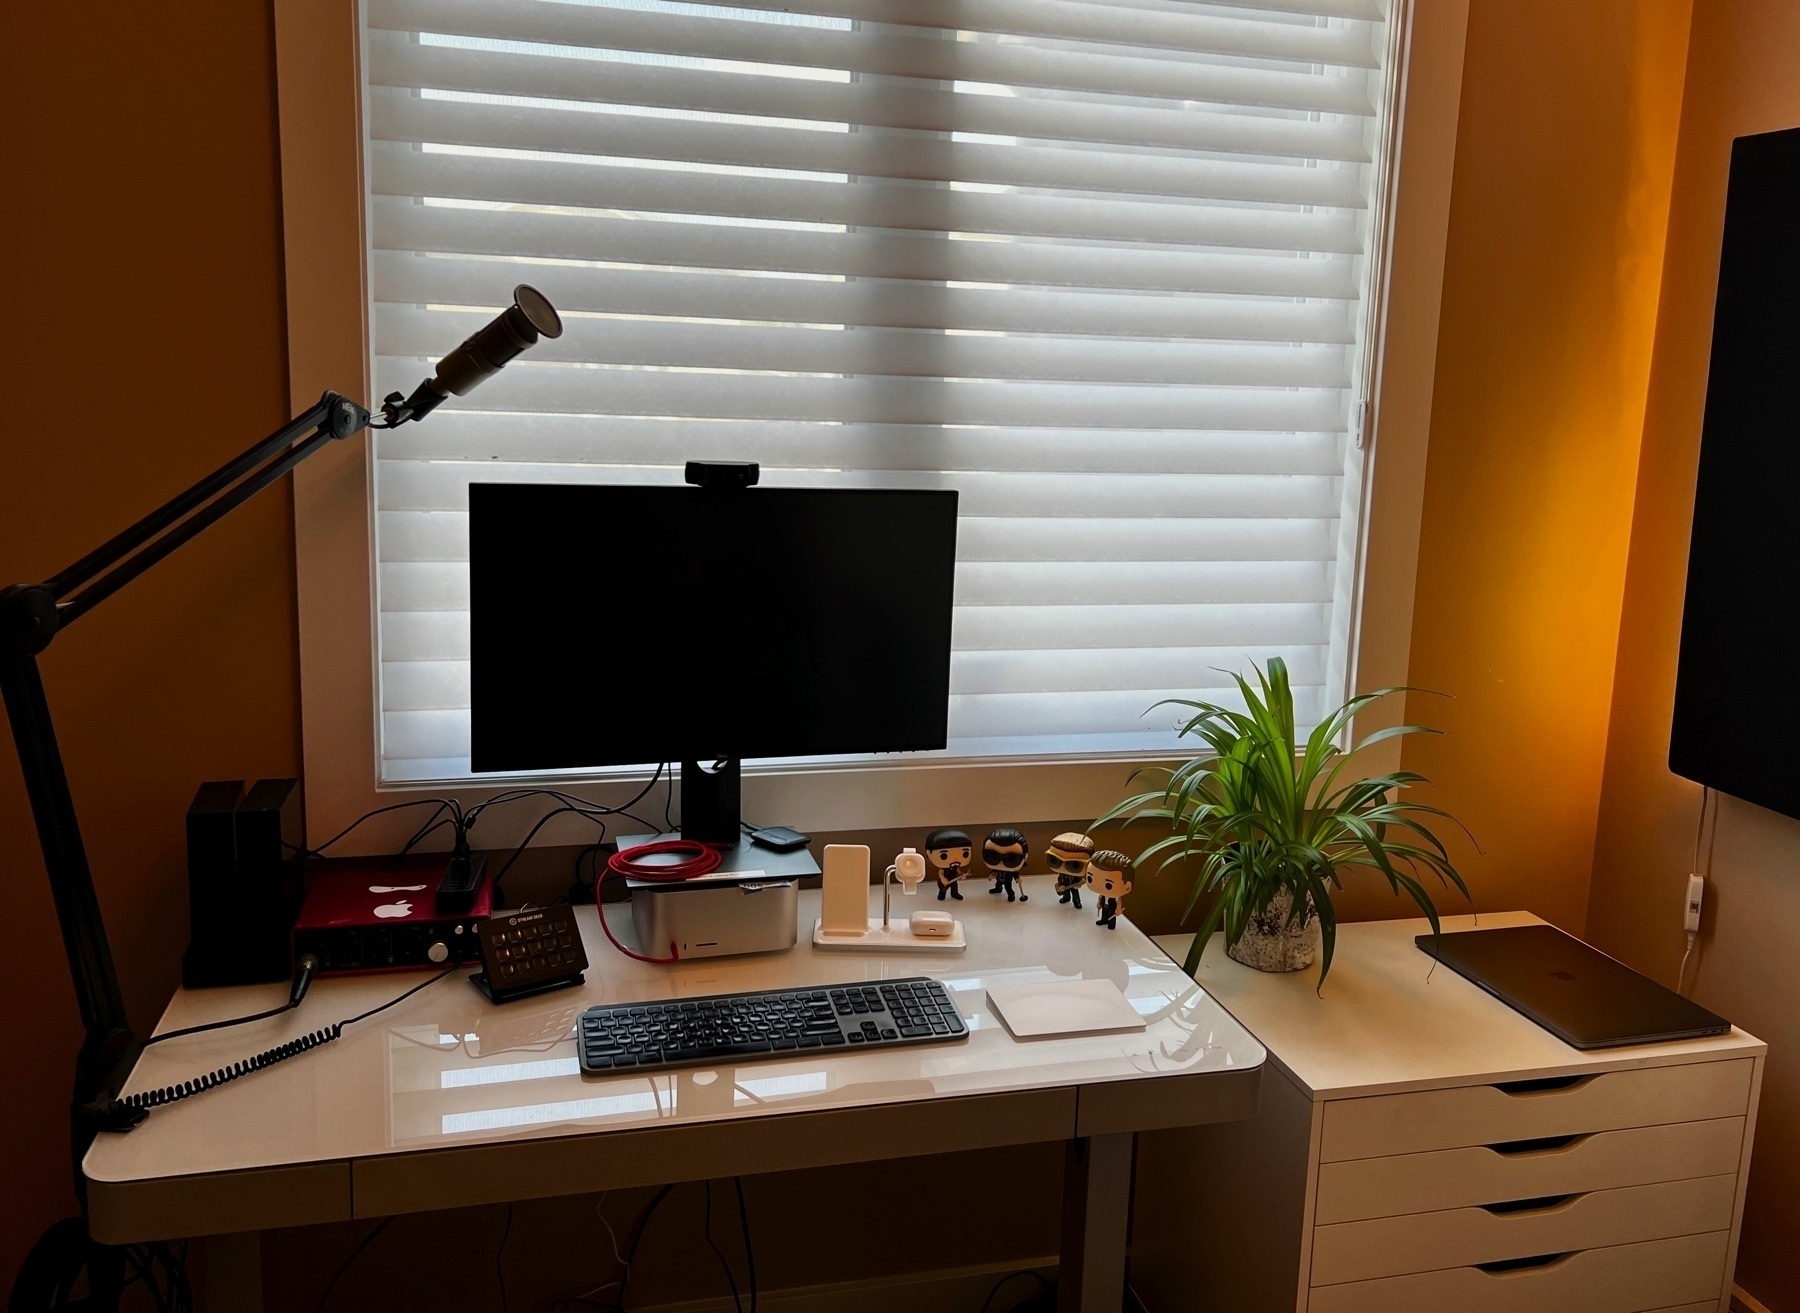 Photo of an office with a white desk, Dell monitor, Mac Studio, Heil PR40 mic on a boom arm, a white set of drawers, a yellow light glowing in the corner, and the members of U2 as funko pop toys on the desk.